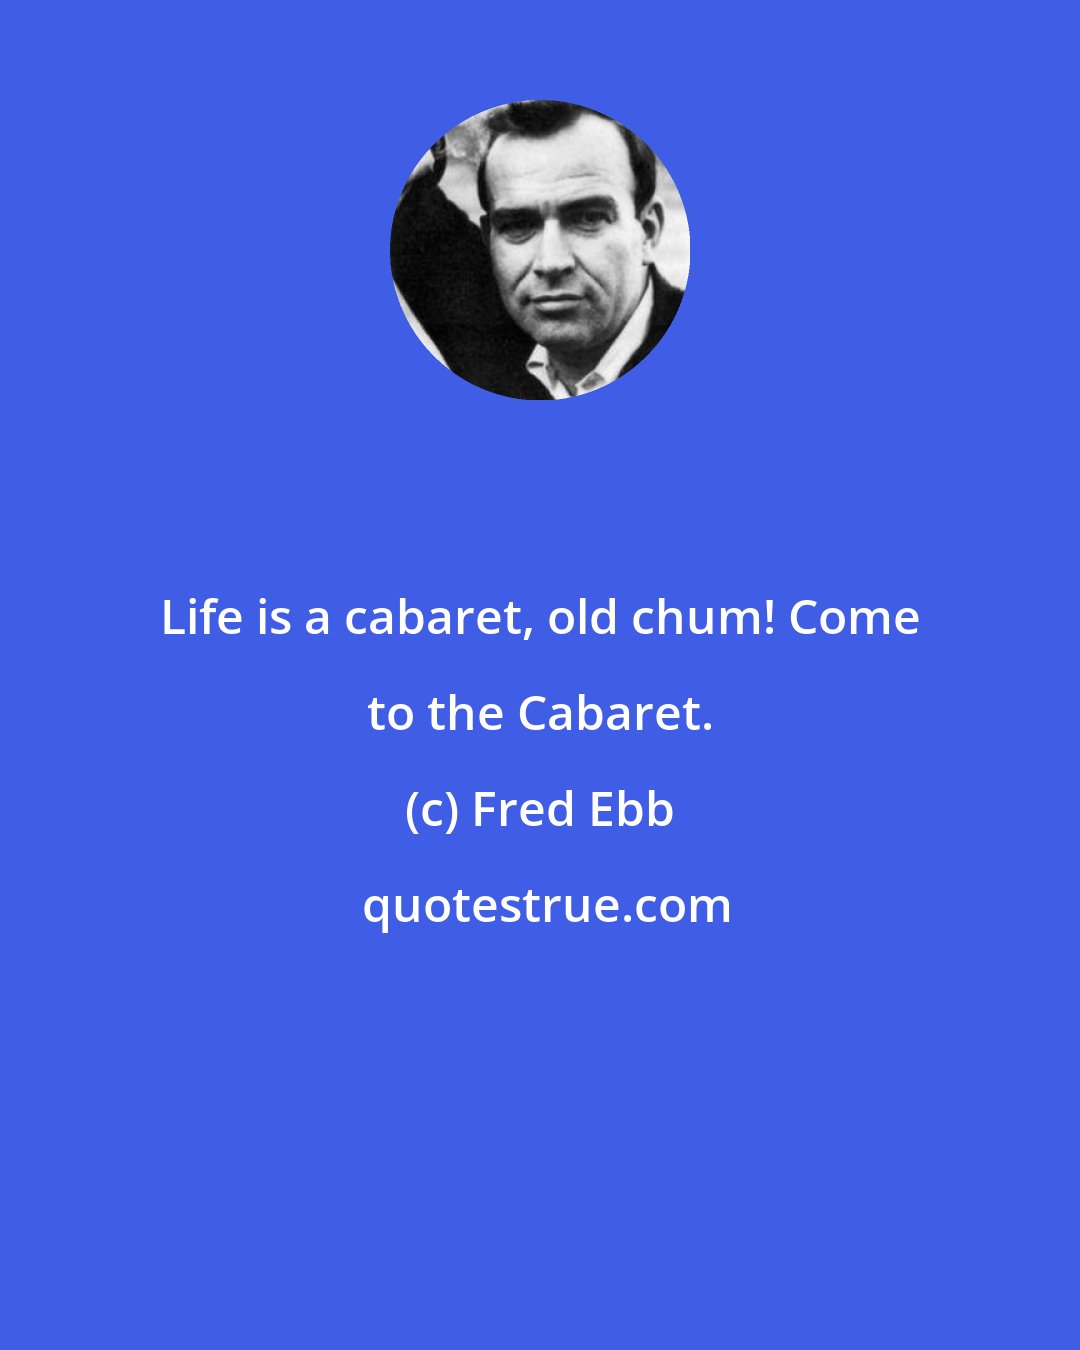 Fred Ebb: Life is a cabaret, old chum! Come to the Cabaret.